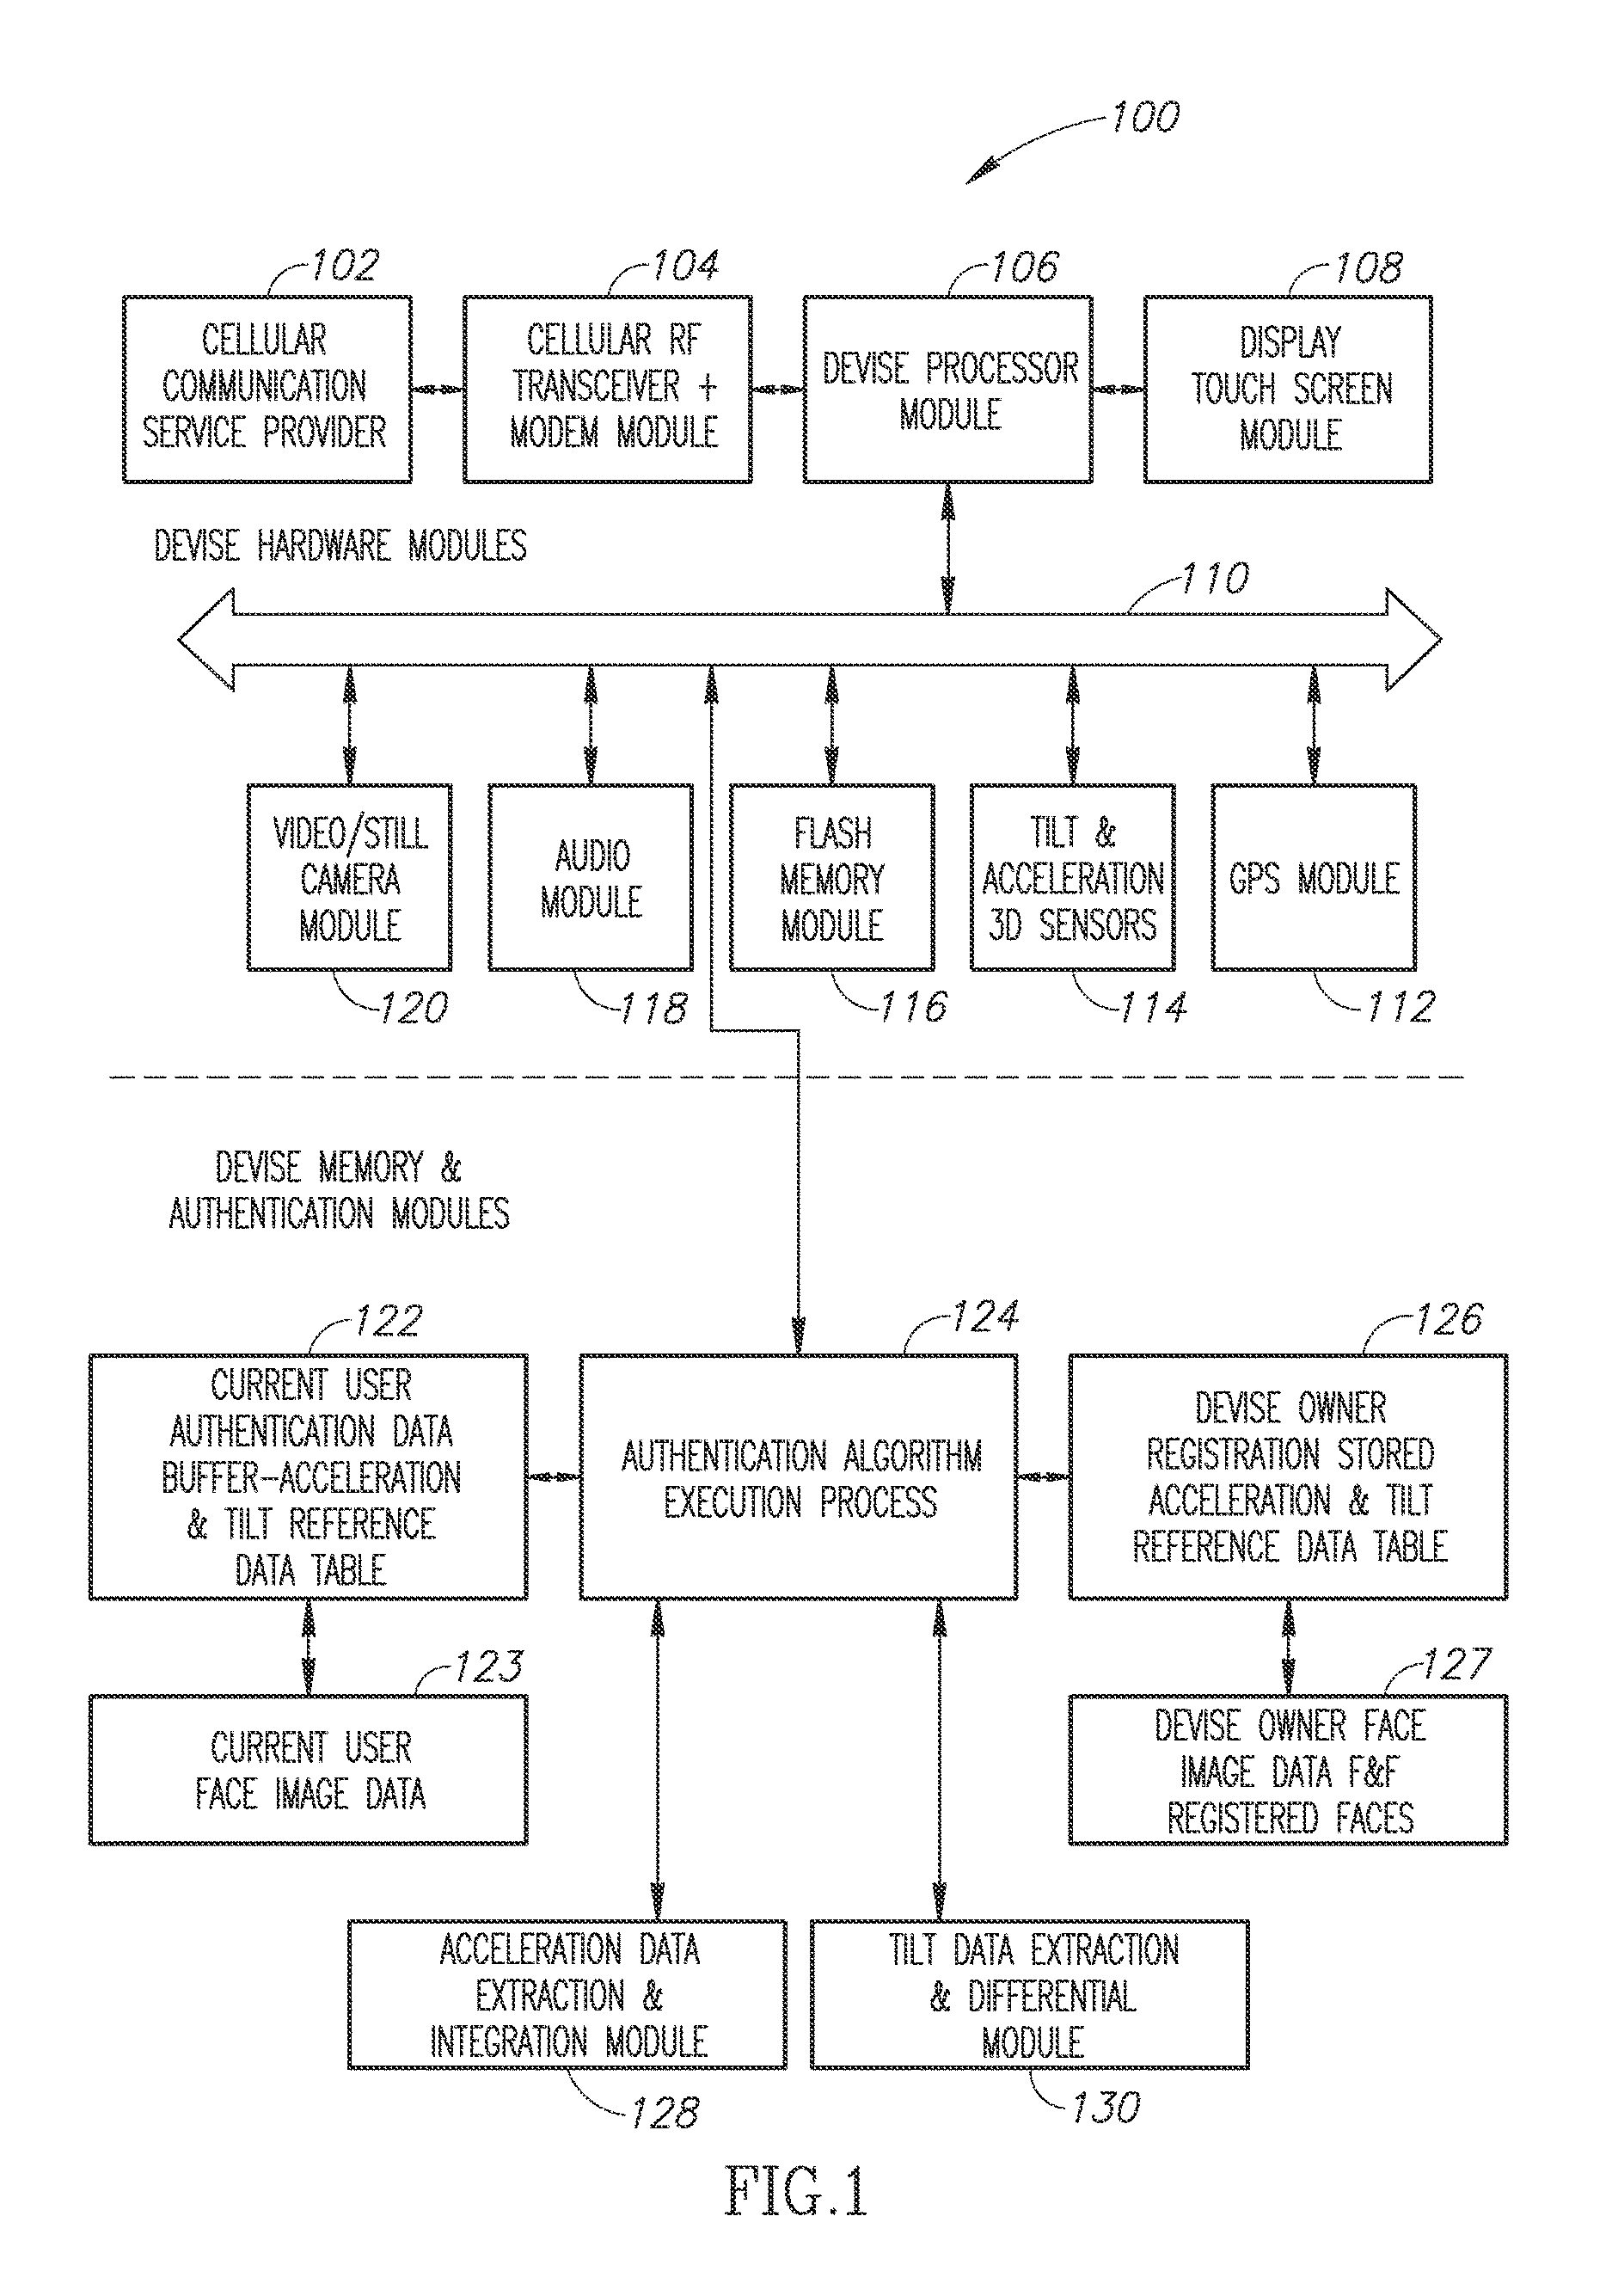 Method and a device to detect and manage non legitimate use or theft of a mobile computerized device